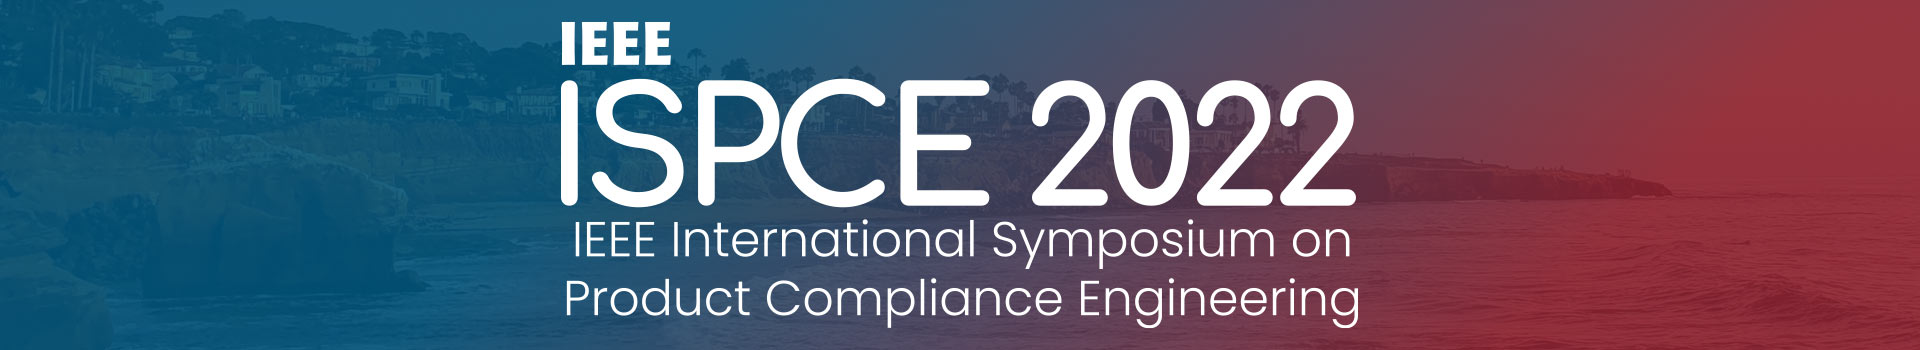 IEEE product safety engineering society symposium 2022 san diego